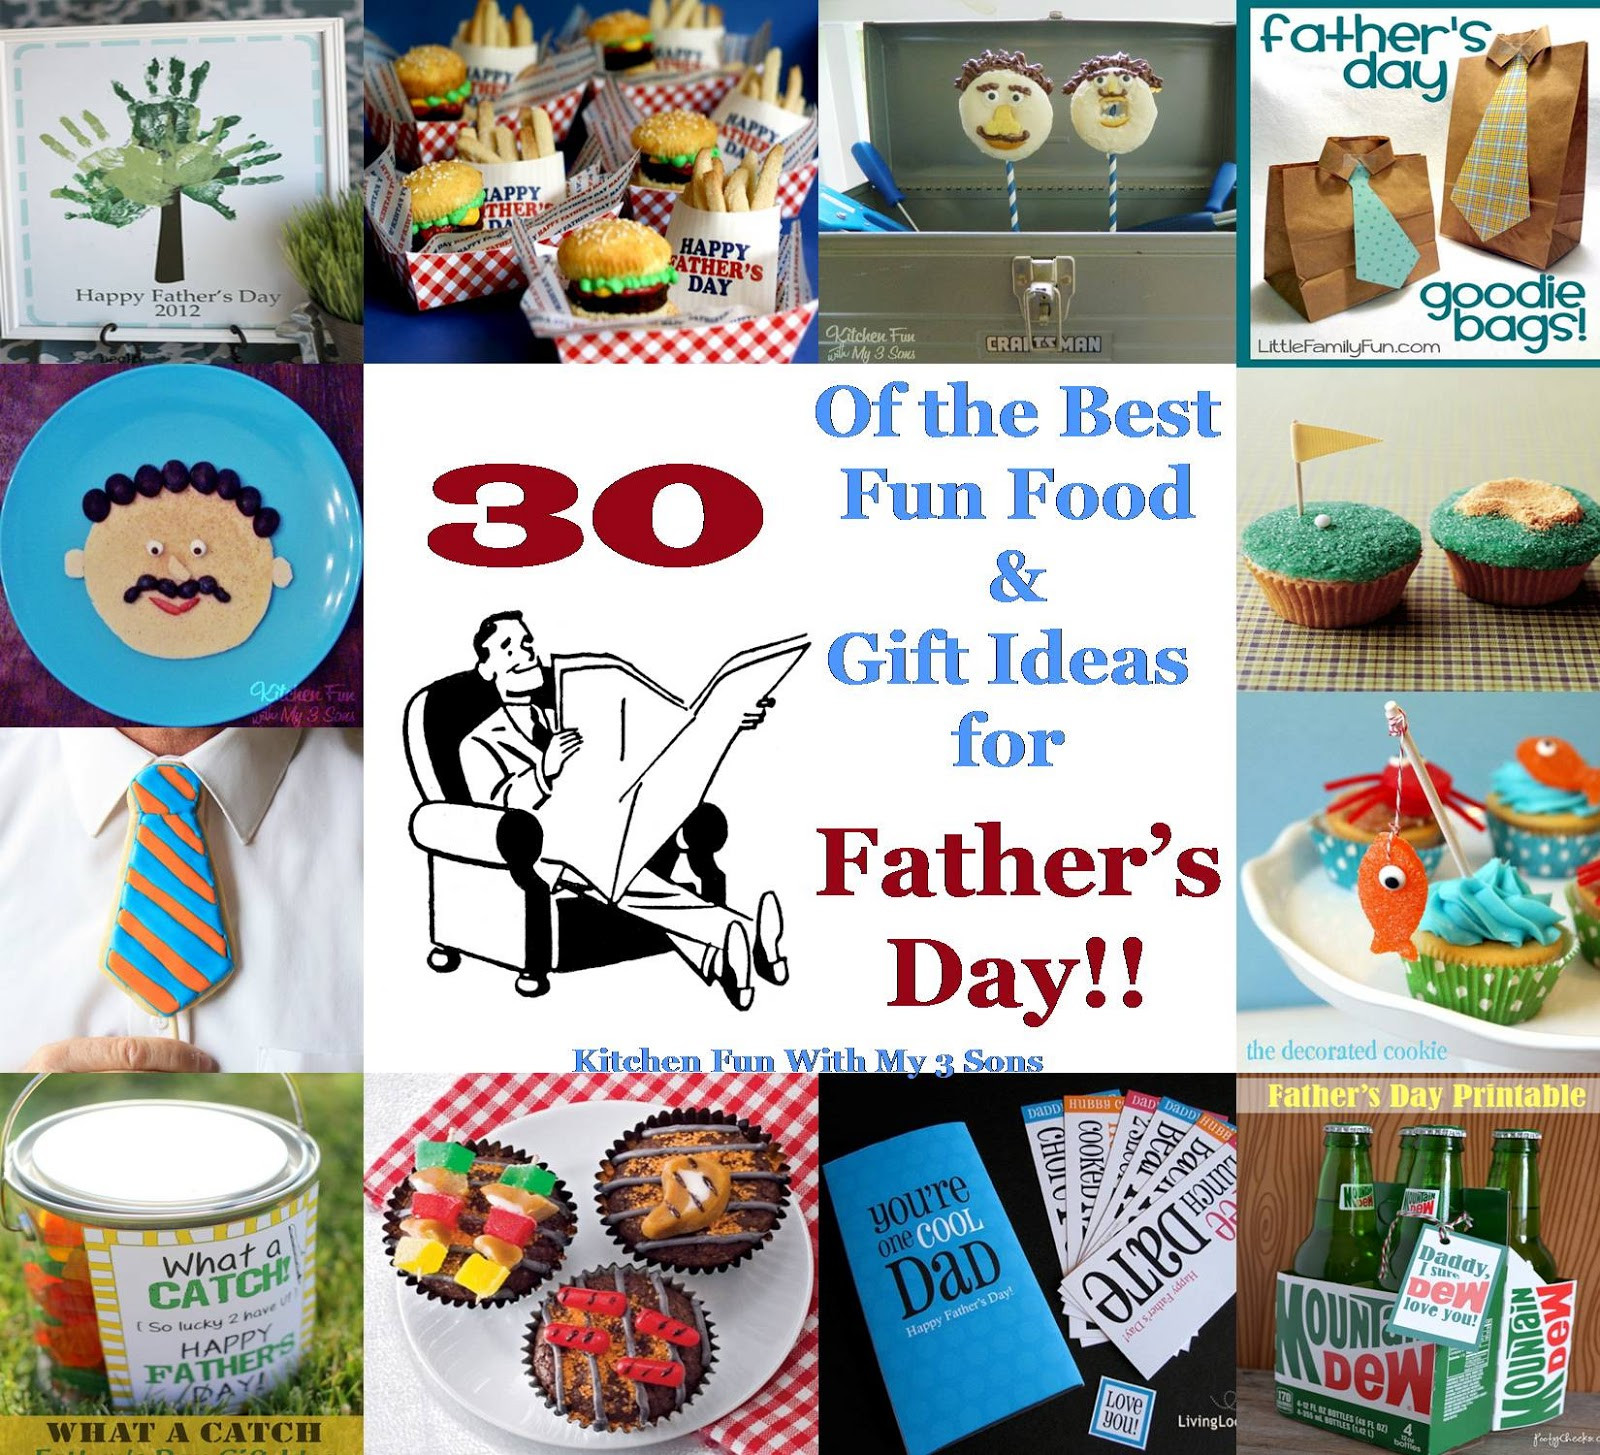 Fun Fathers Day Ideas
 30 of the Best Fun Food & Gift Ideas for Father s Day